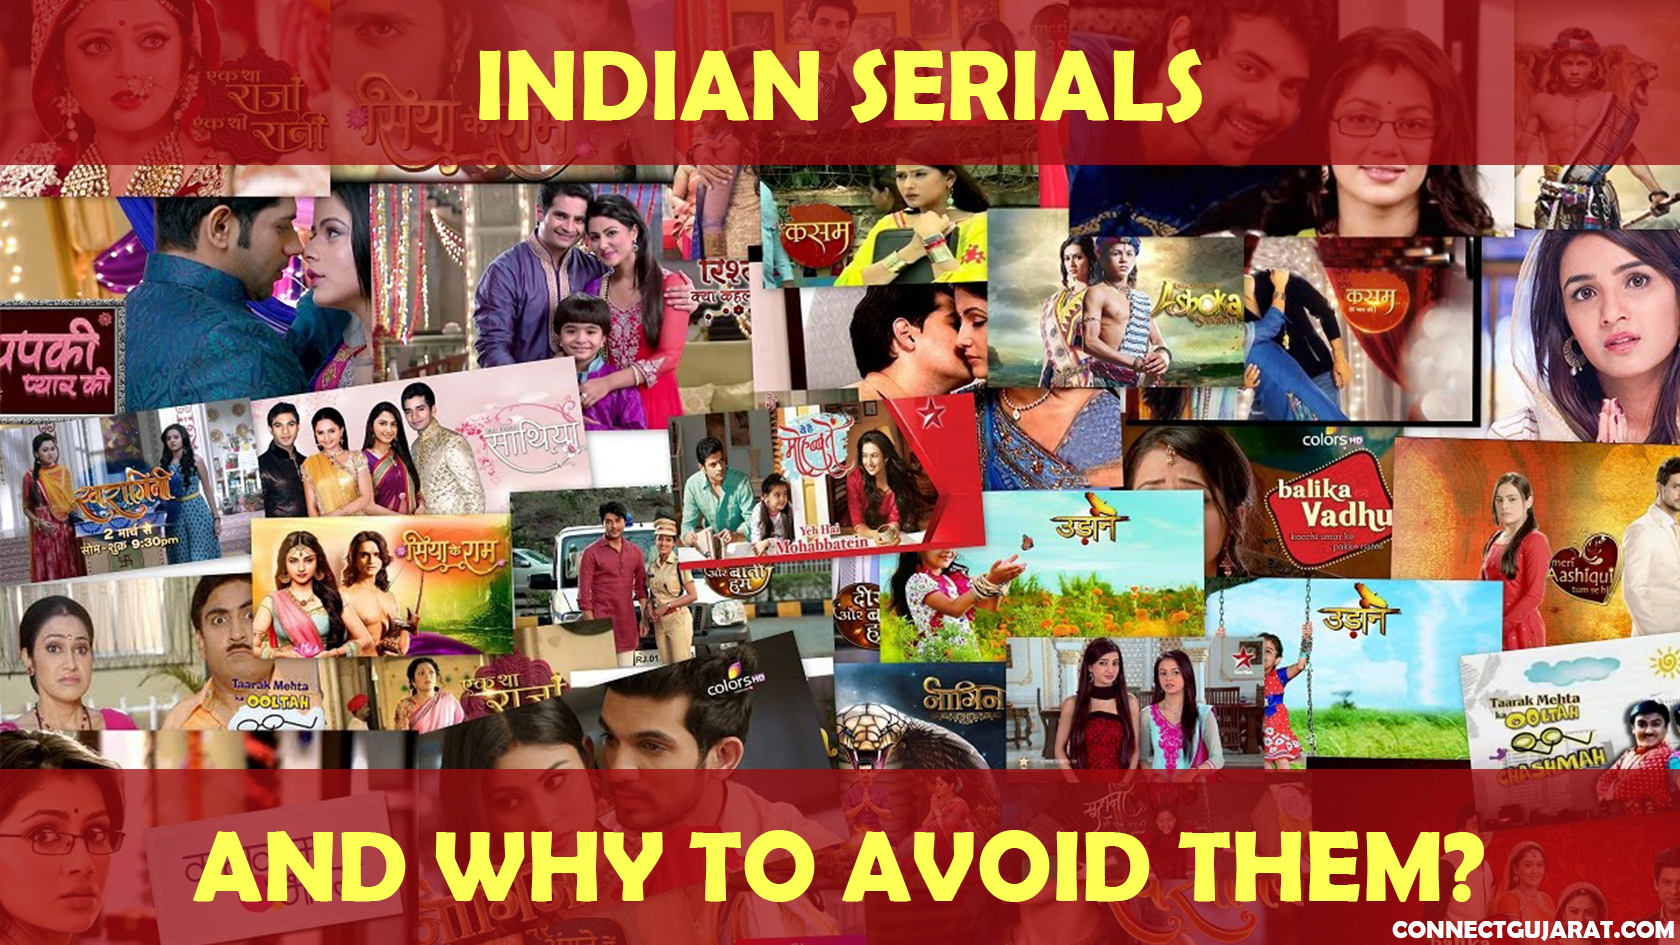 Indian Serials and why to avoid them?